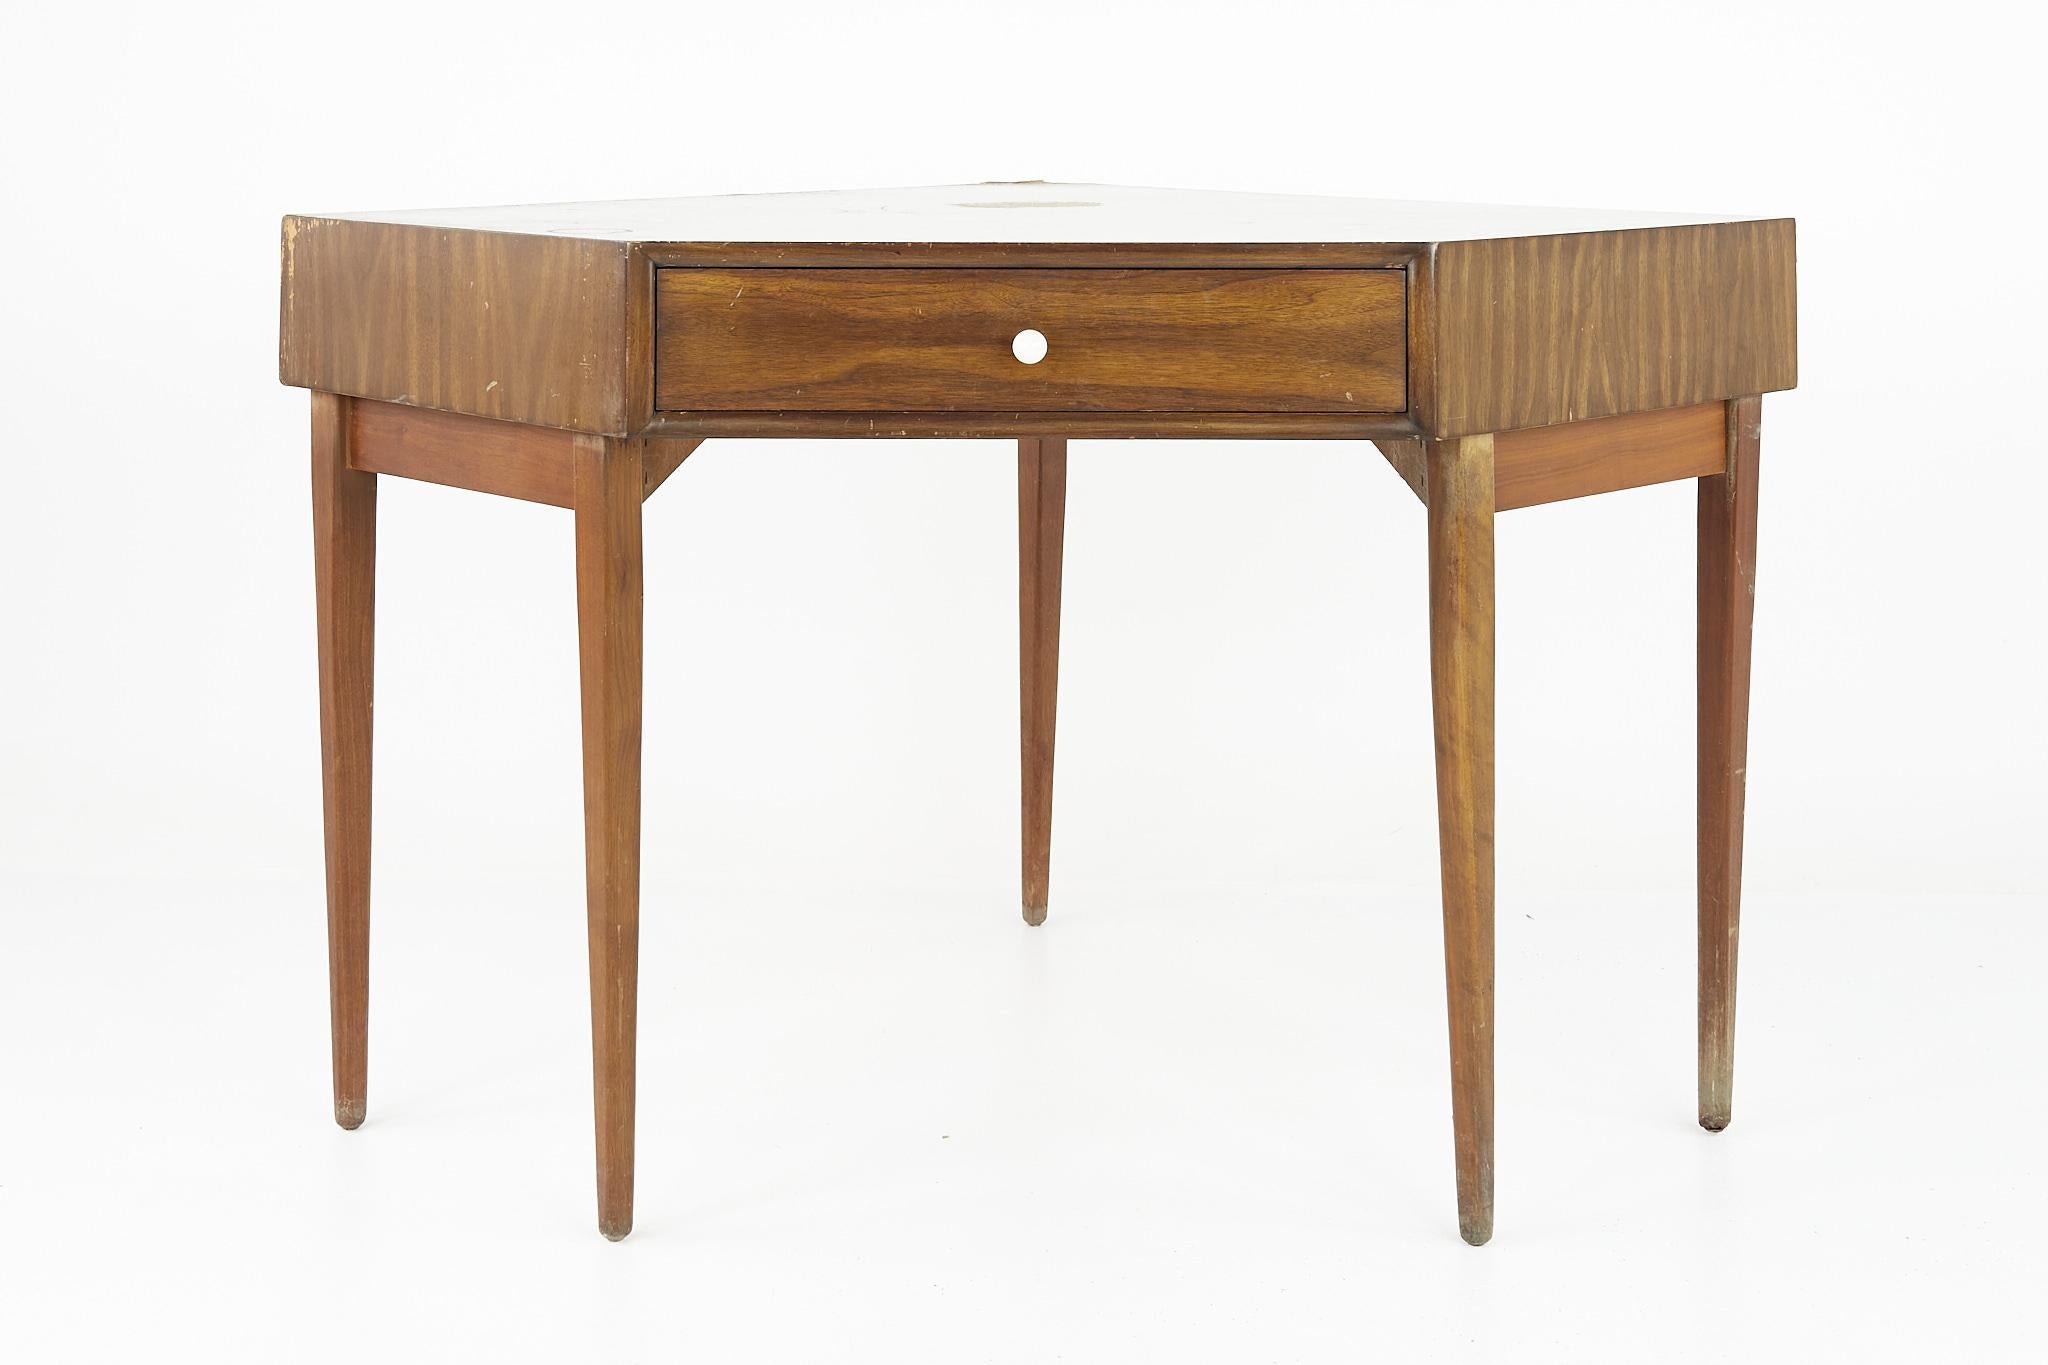 Kipp Stewart for Drexel declaration mid century walnut corner desk

This desk measures: 52.5 wide x 40.25 deep x 31.5 inches high, with a chair clearance of 22.5 inches

?All pieces of furniture can be had in what we call restored vintage